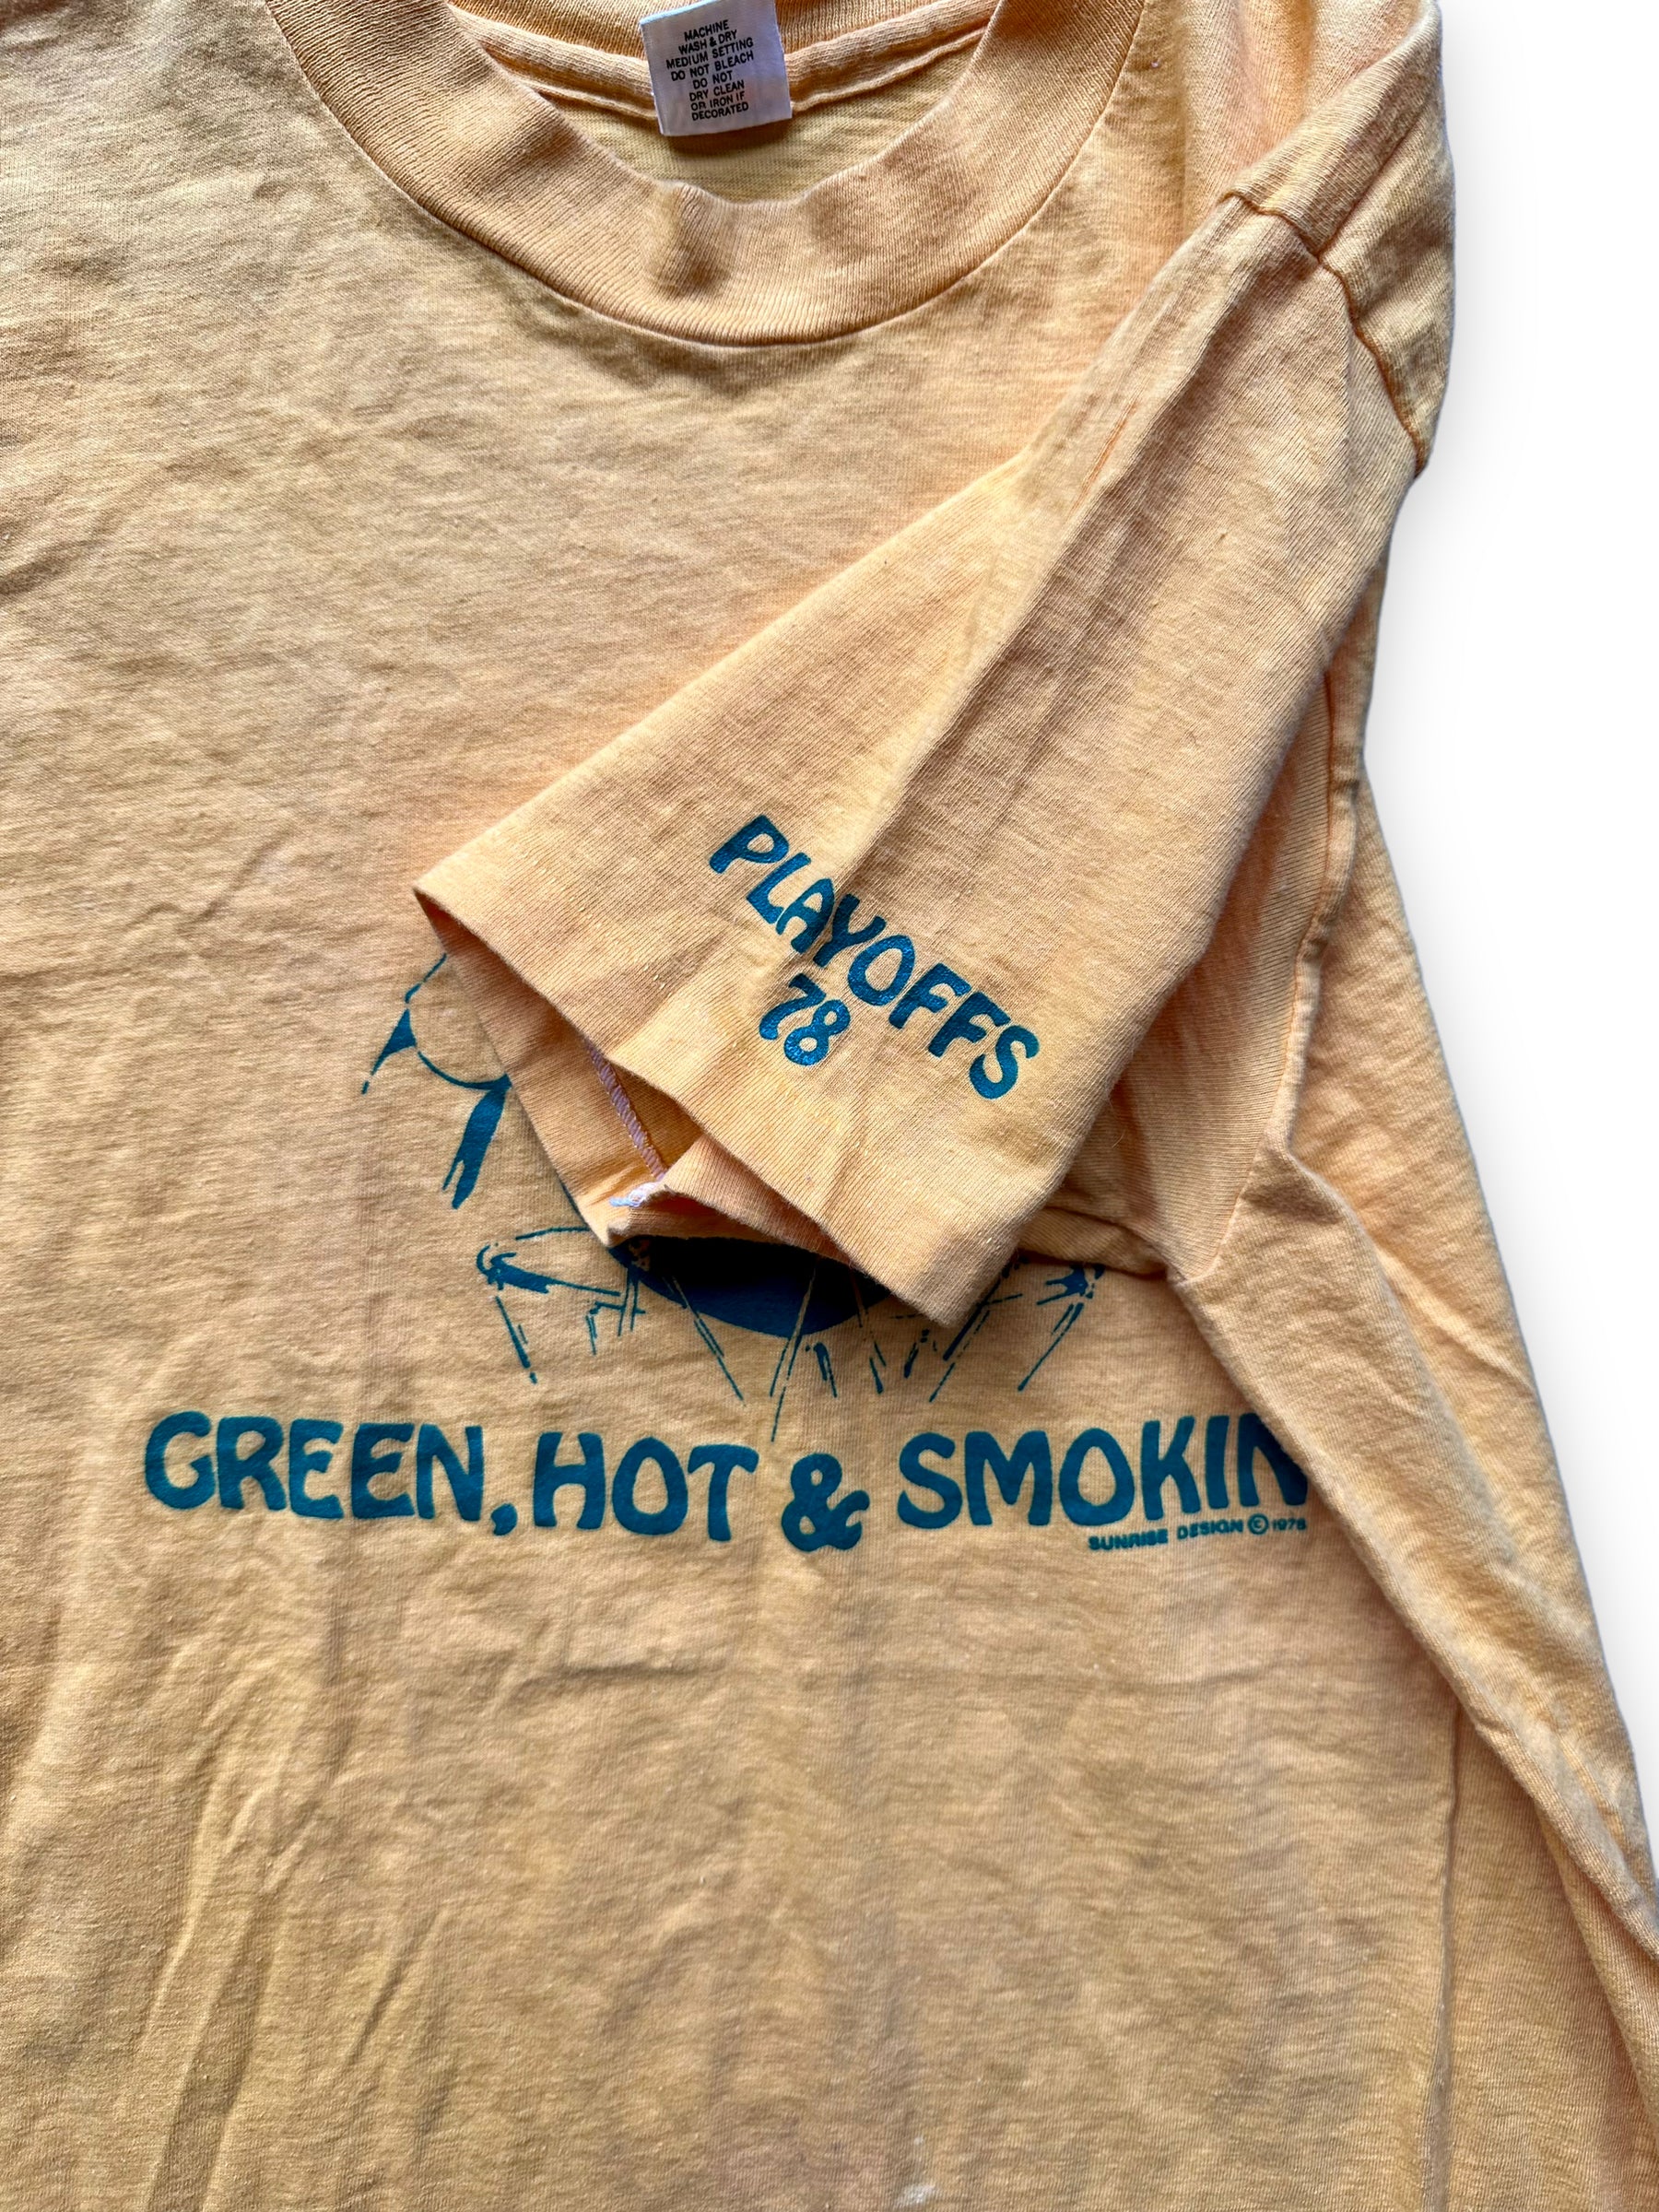 Playoffs 78 Call Out On Sleeve of Vintage 1978 Seattle Supersonics Green, Hot & Smoking Playoff Tee SZ M | Vintage Seattle SuperSonics Tees | Barn Owl Vintage